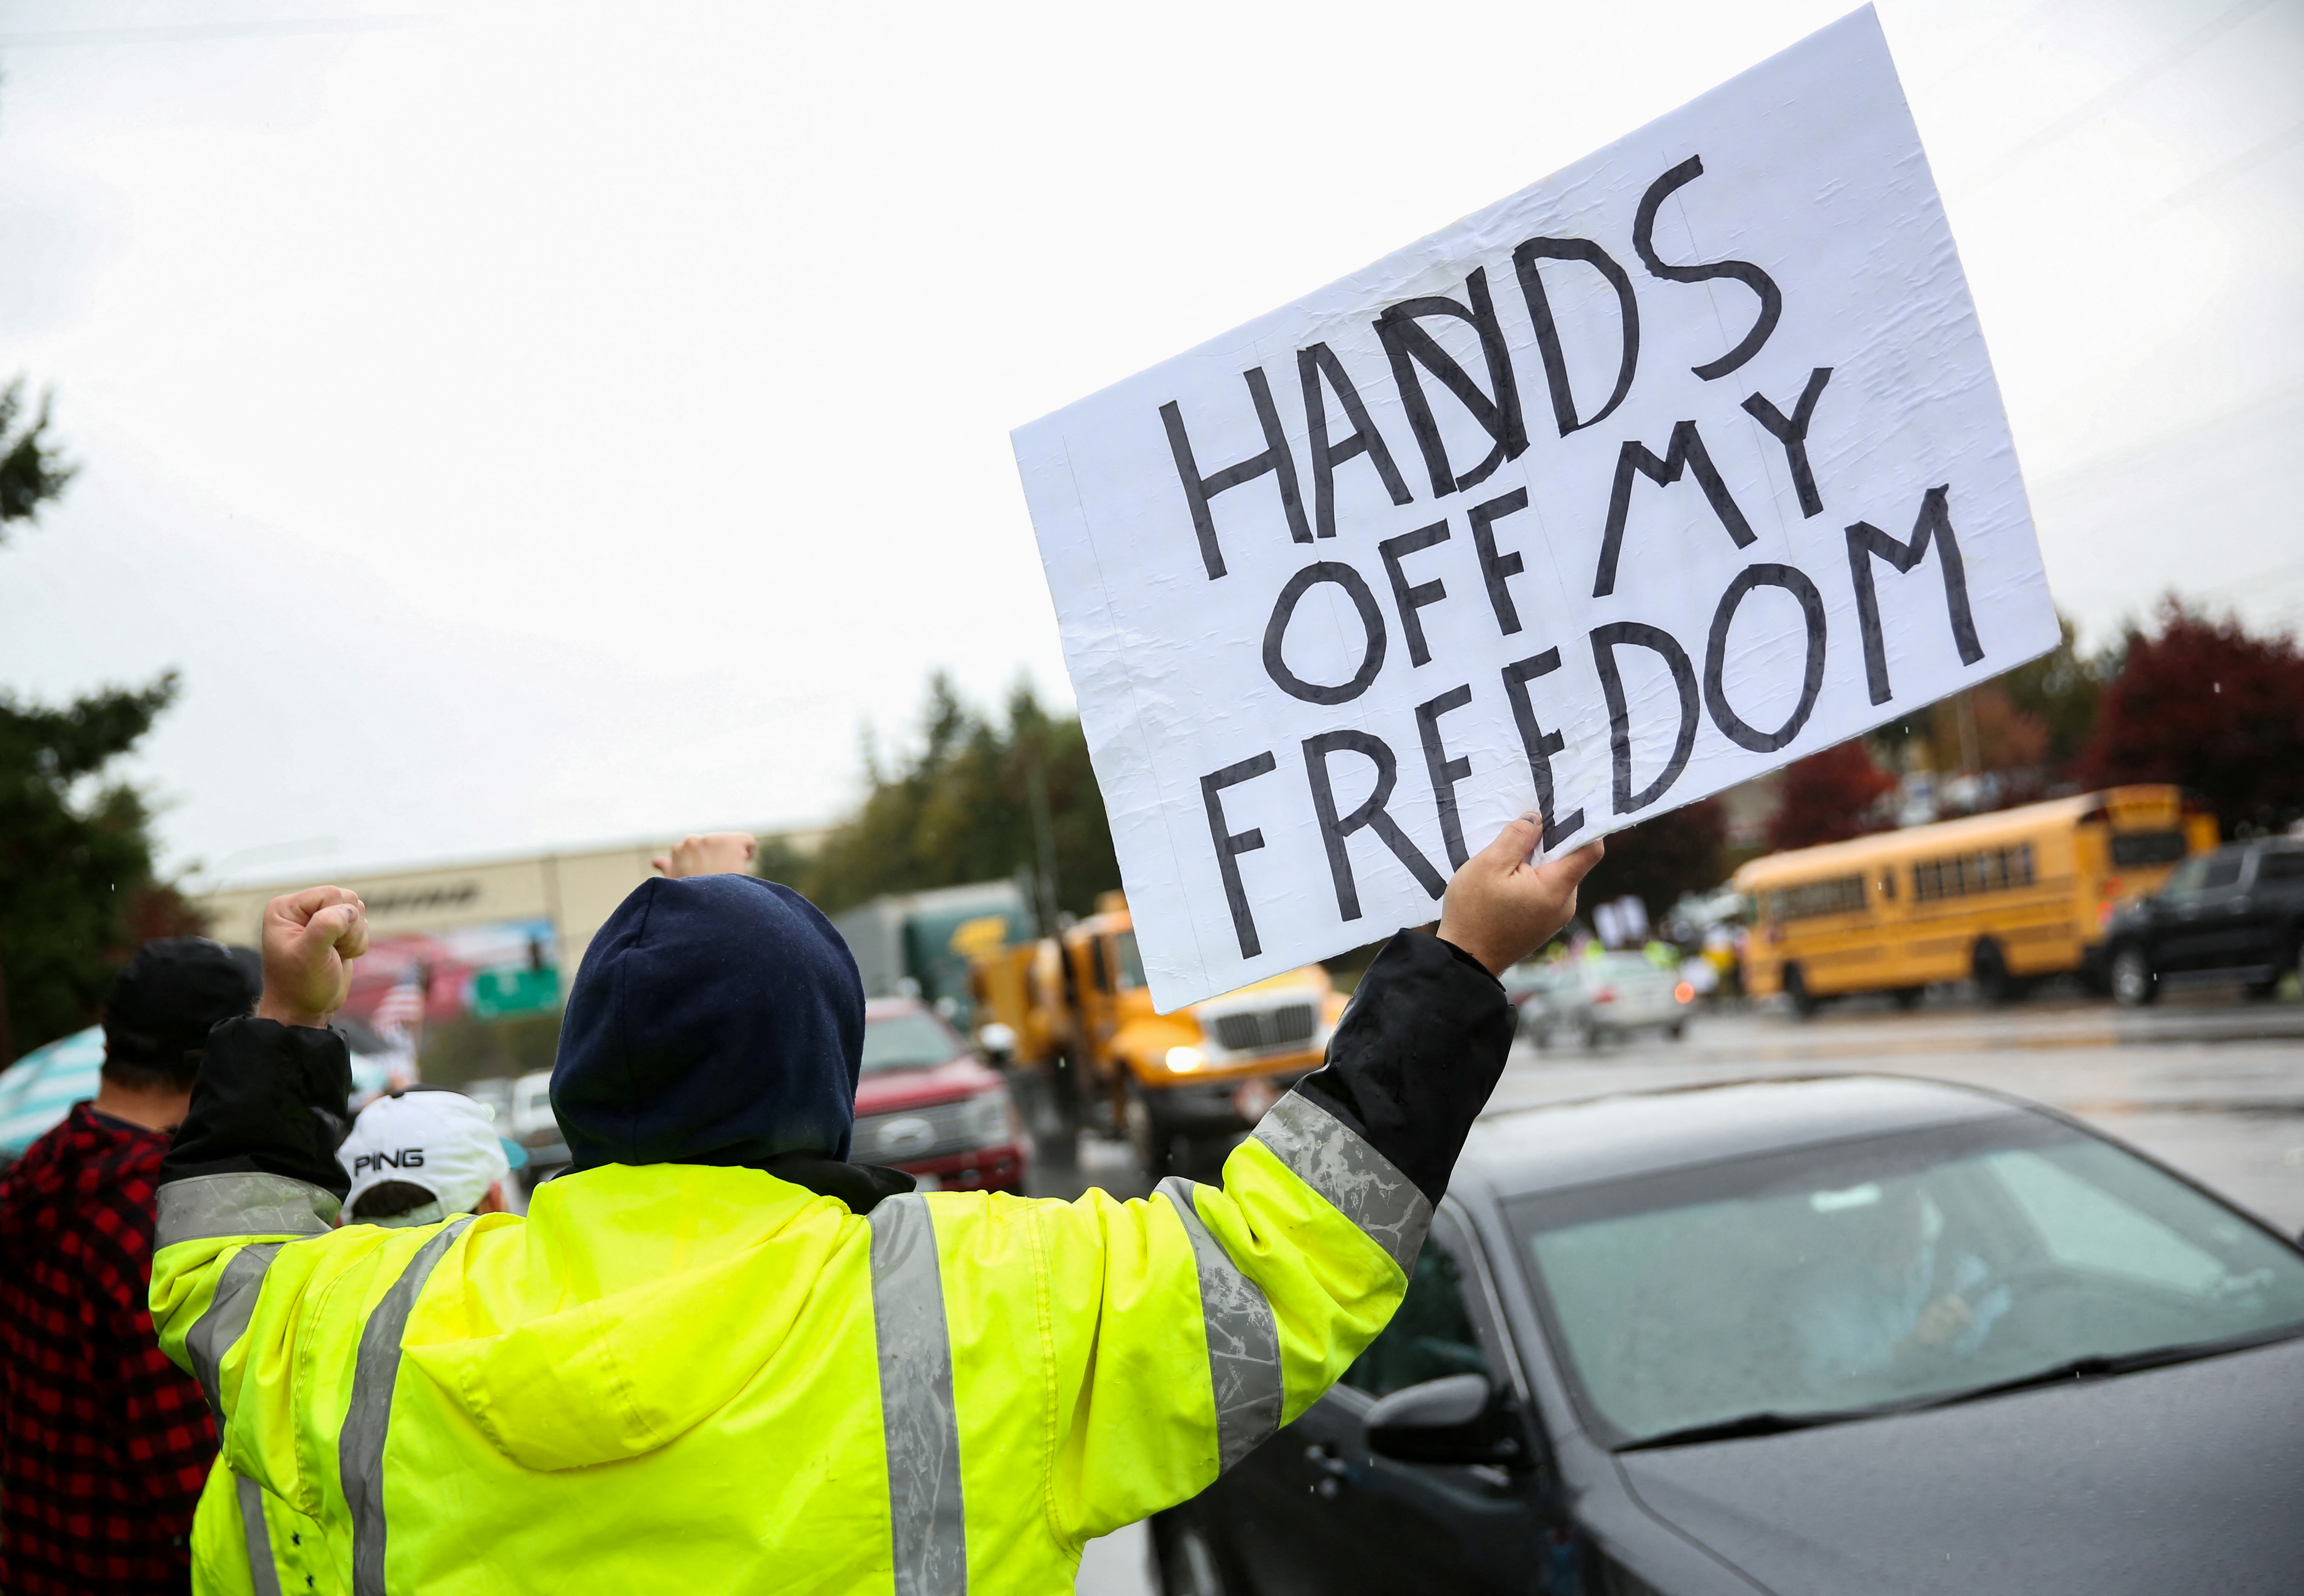 A protester gestures at passing traffic as Boeing employees and others line the street to protest the company's coronavirus disease (COVID-19) vaccine mandate, outside the Boeing facility in Everett, Washington, October 15, 2021.  REUTERS/Lindsey Wasson